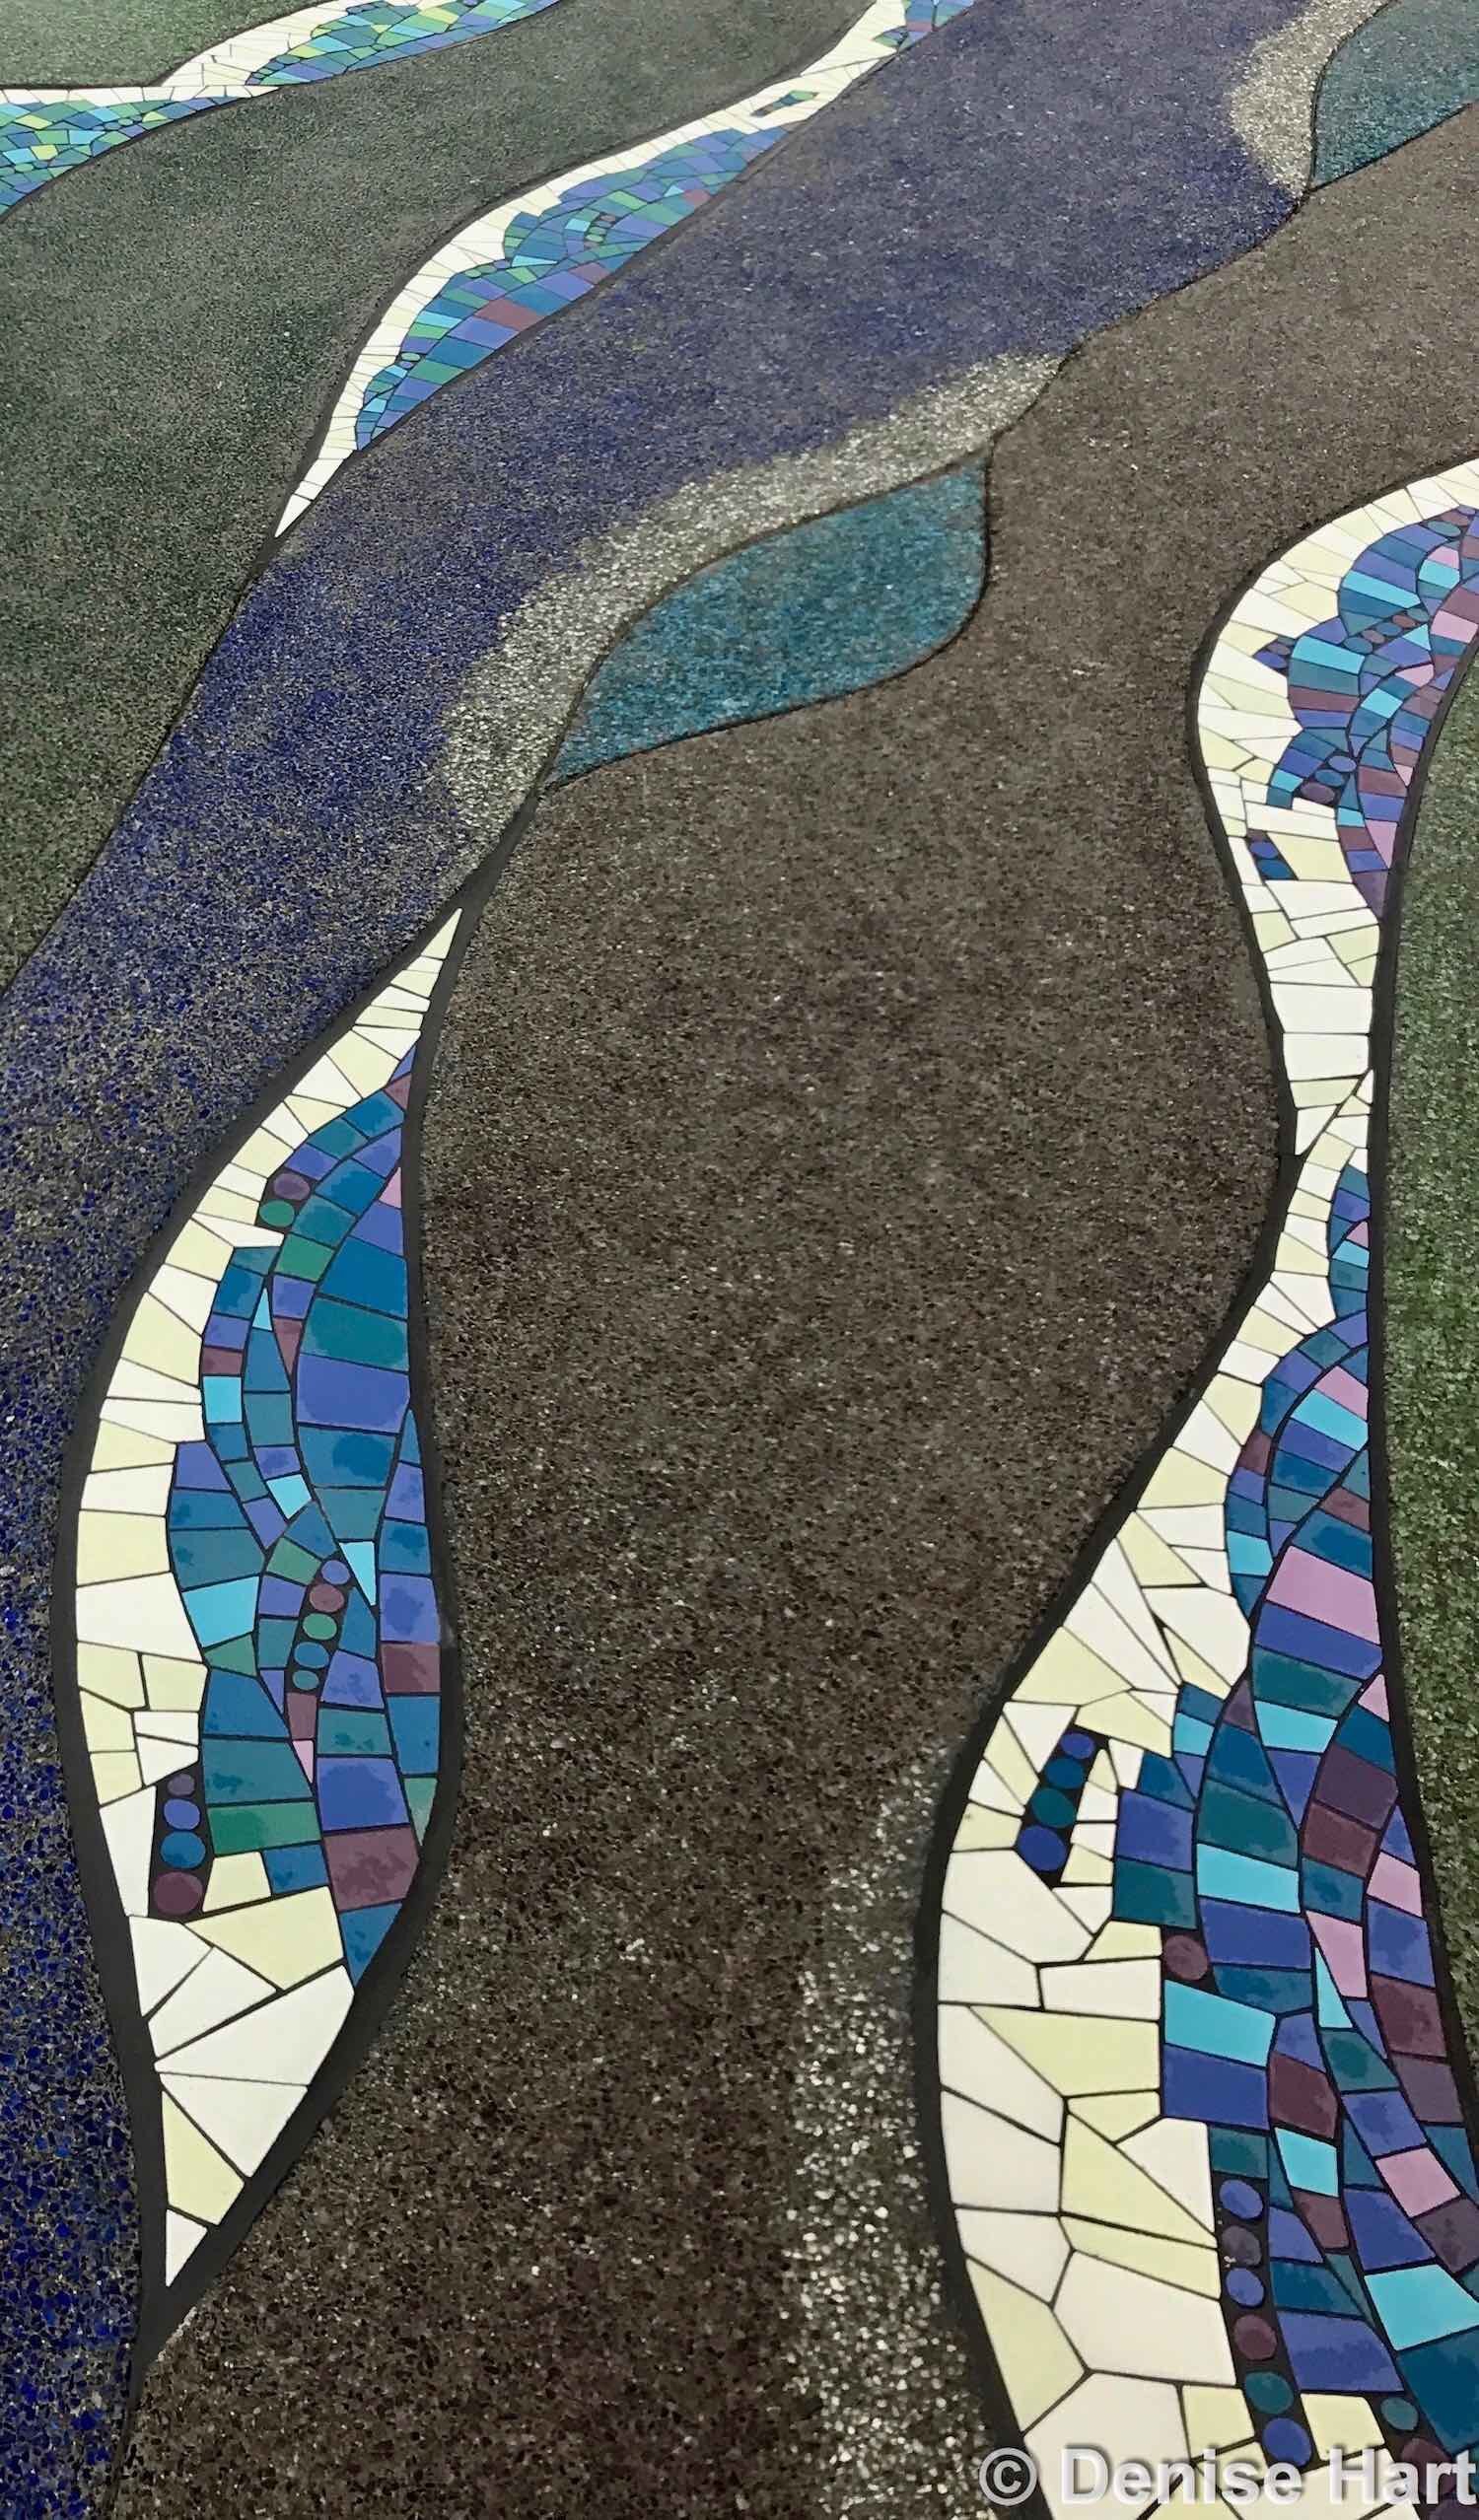 Another close-up of wave mosaic